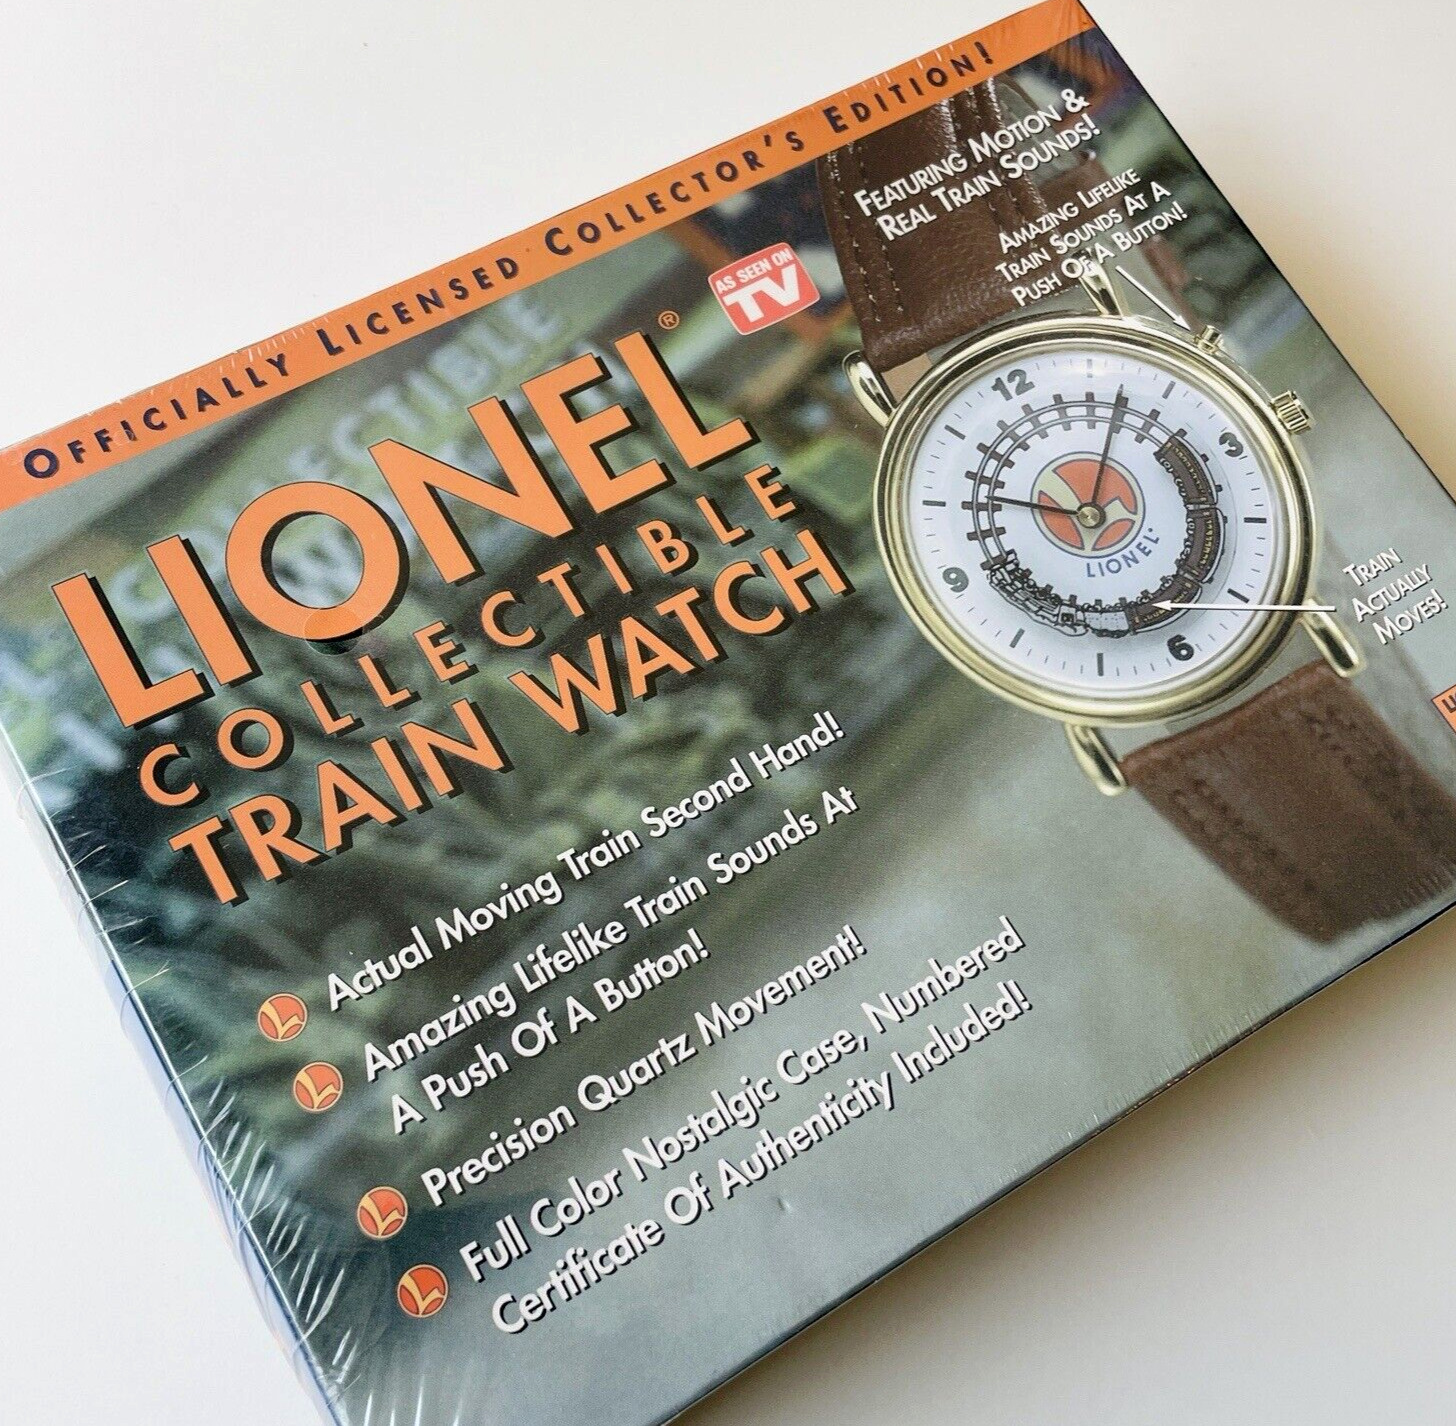 Lionel Trains Collectible Train Wrist Watch with Case [NEW + SEALED] Gift